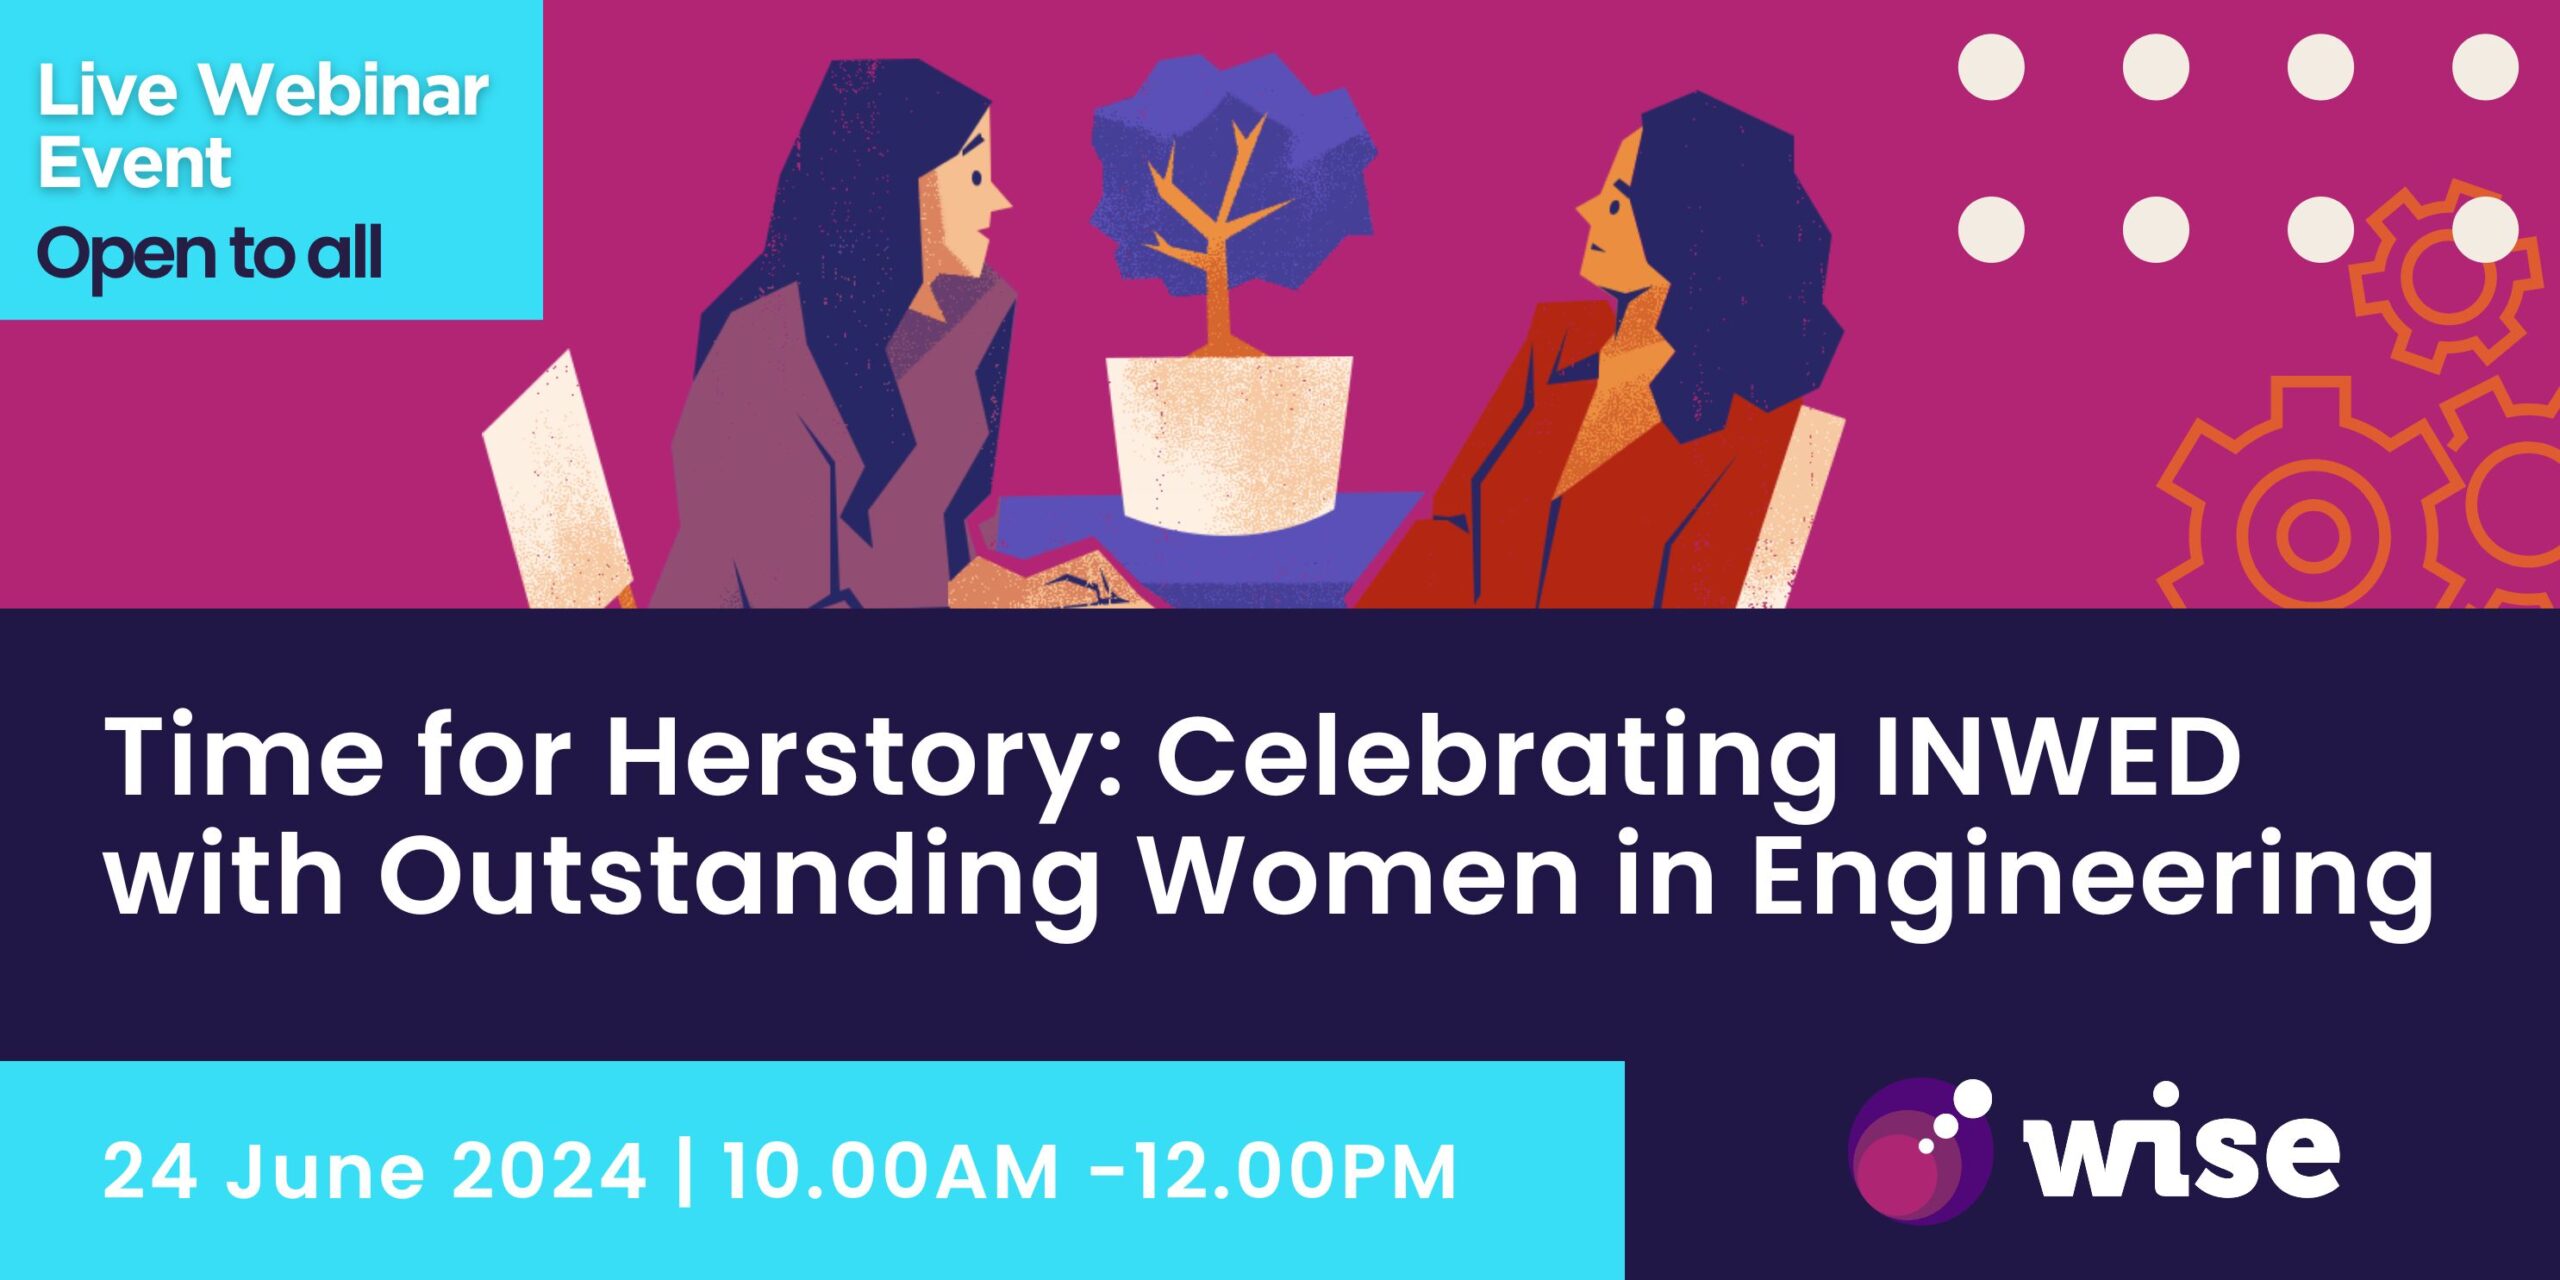 Time for Herstory: Celebrating INWED with Outstanding Women in Engineering